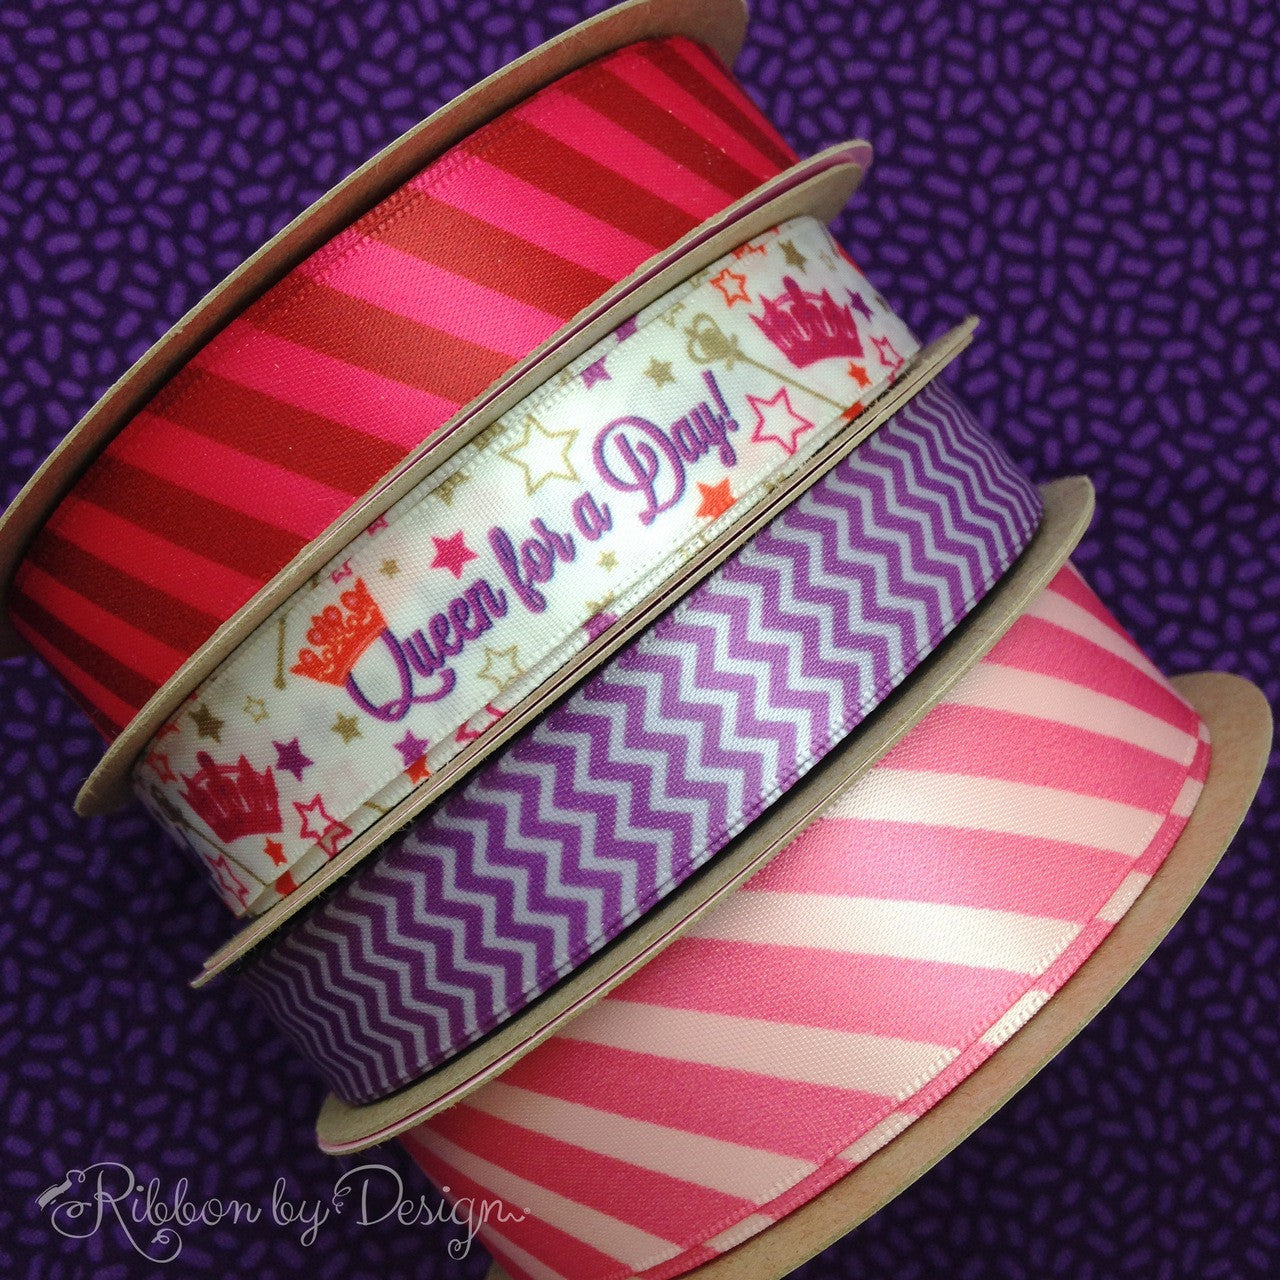 Mixing our patterns is a great way to enhance packaging! Queen for a Day will mix well with pink on pink stripes or lavender chevron for a great Mother's Day gift look!